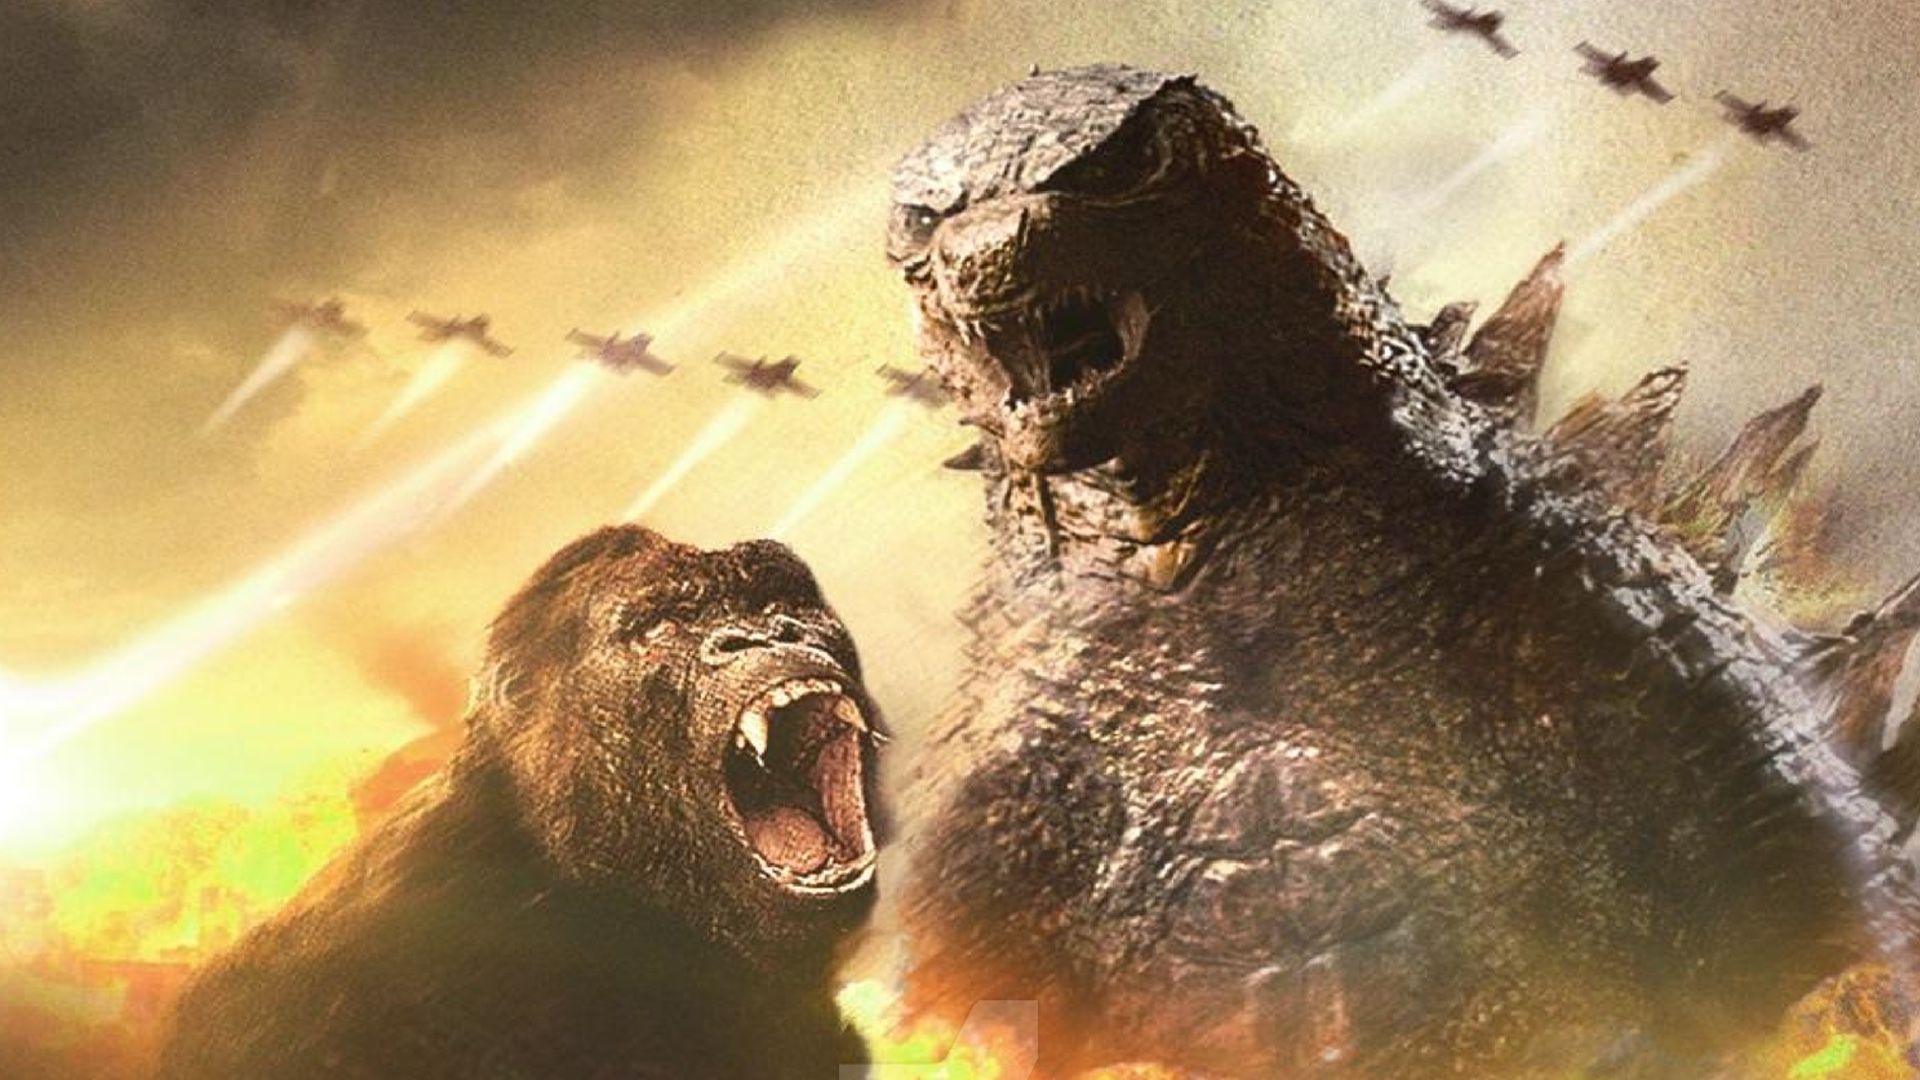 The First Set Photo From GODZILLA VS. KONG Have Surfaced Showing